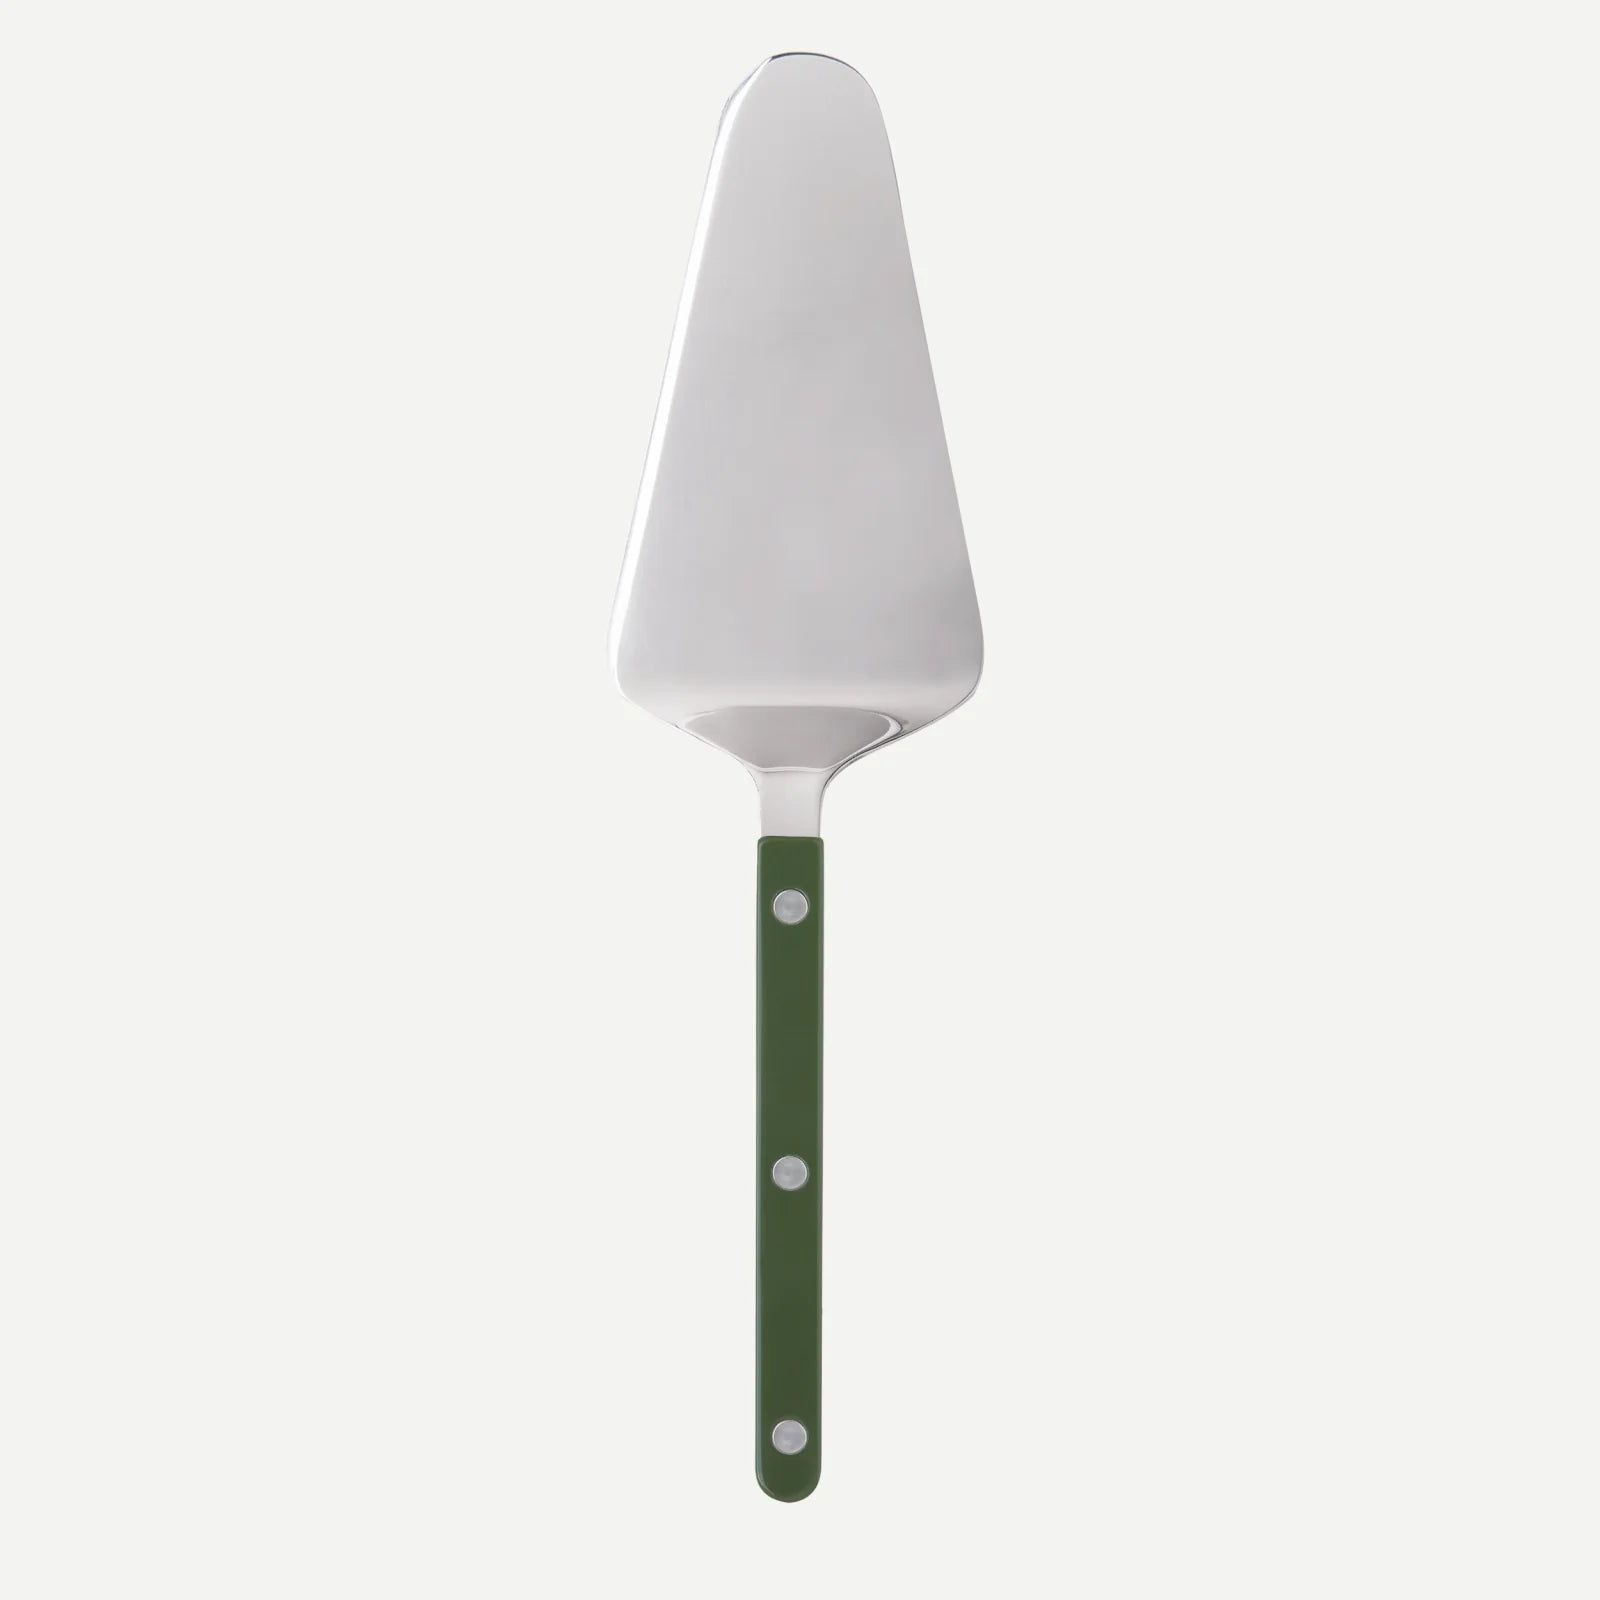 A tart slicer made by Sabre Paris with a forest green coloured handle. 